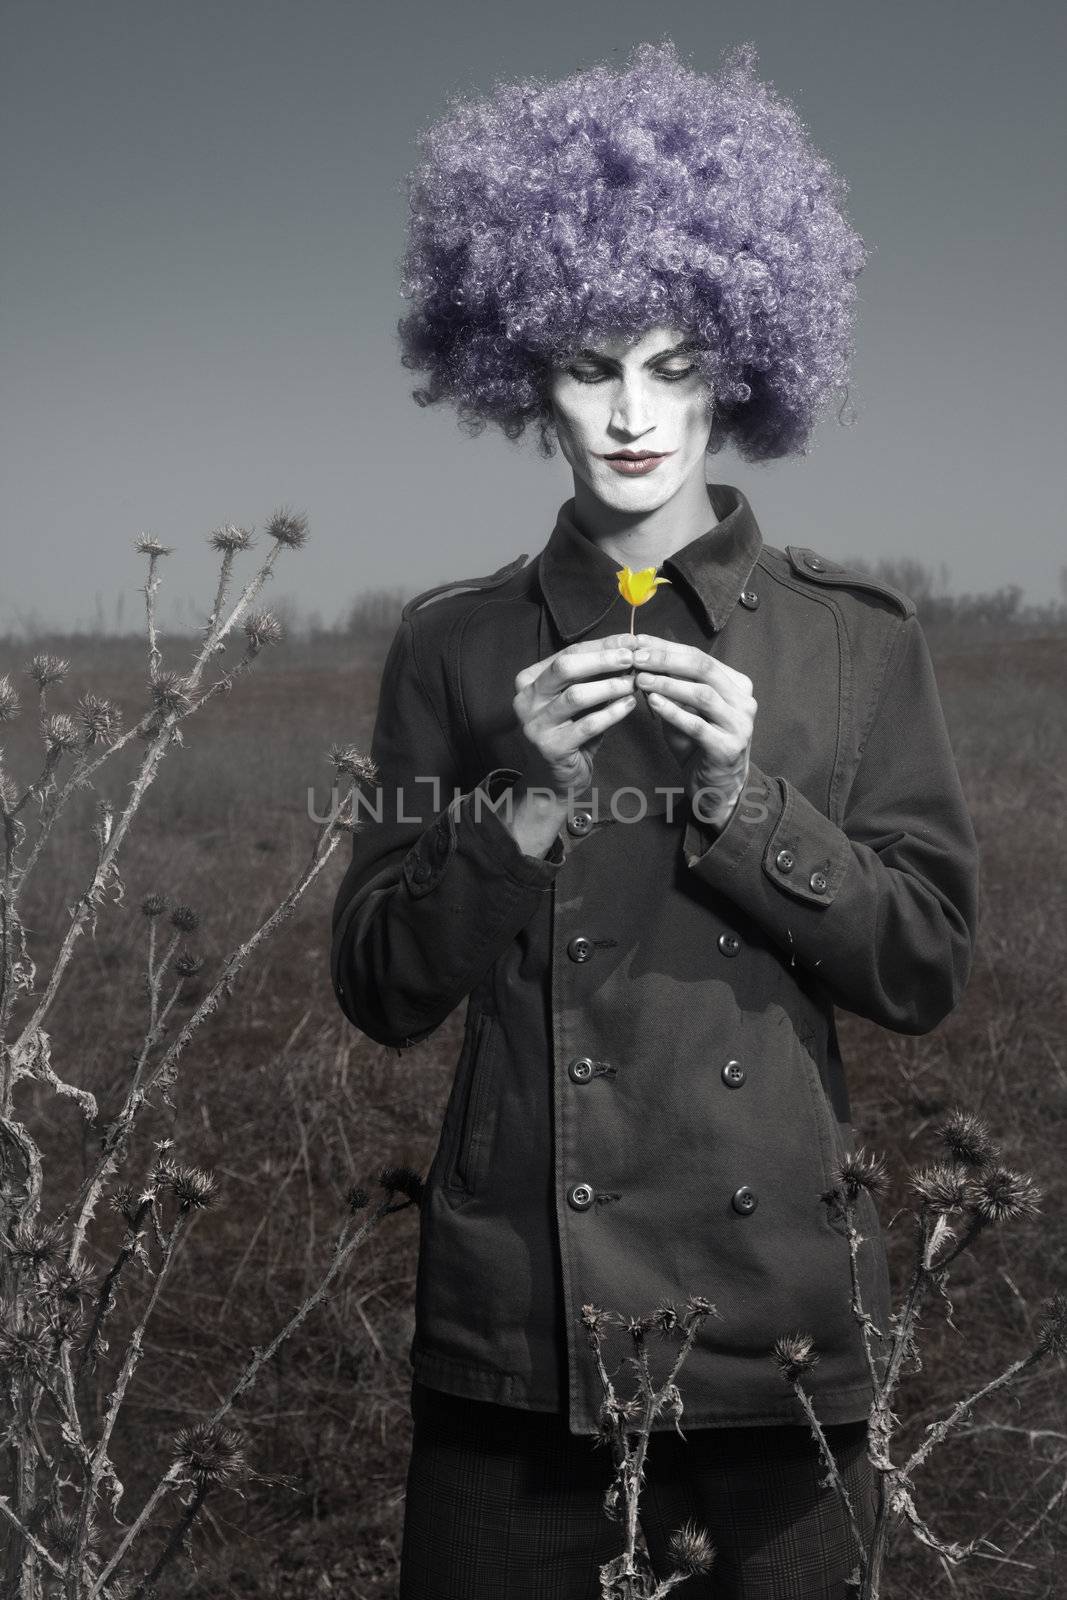 Romantic photo of the clown outdoors holding yellow flower